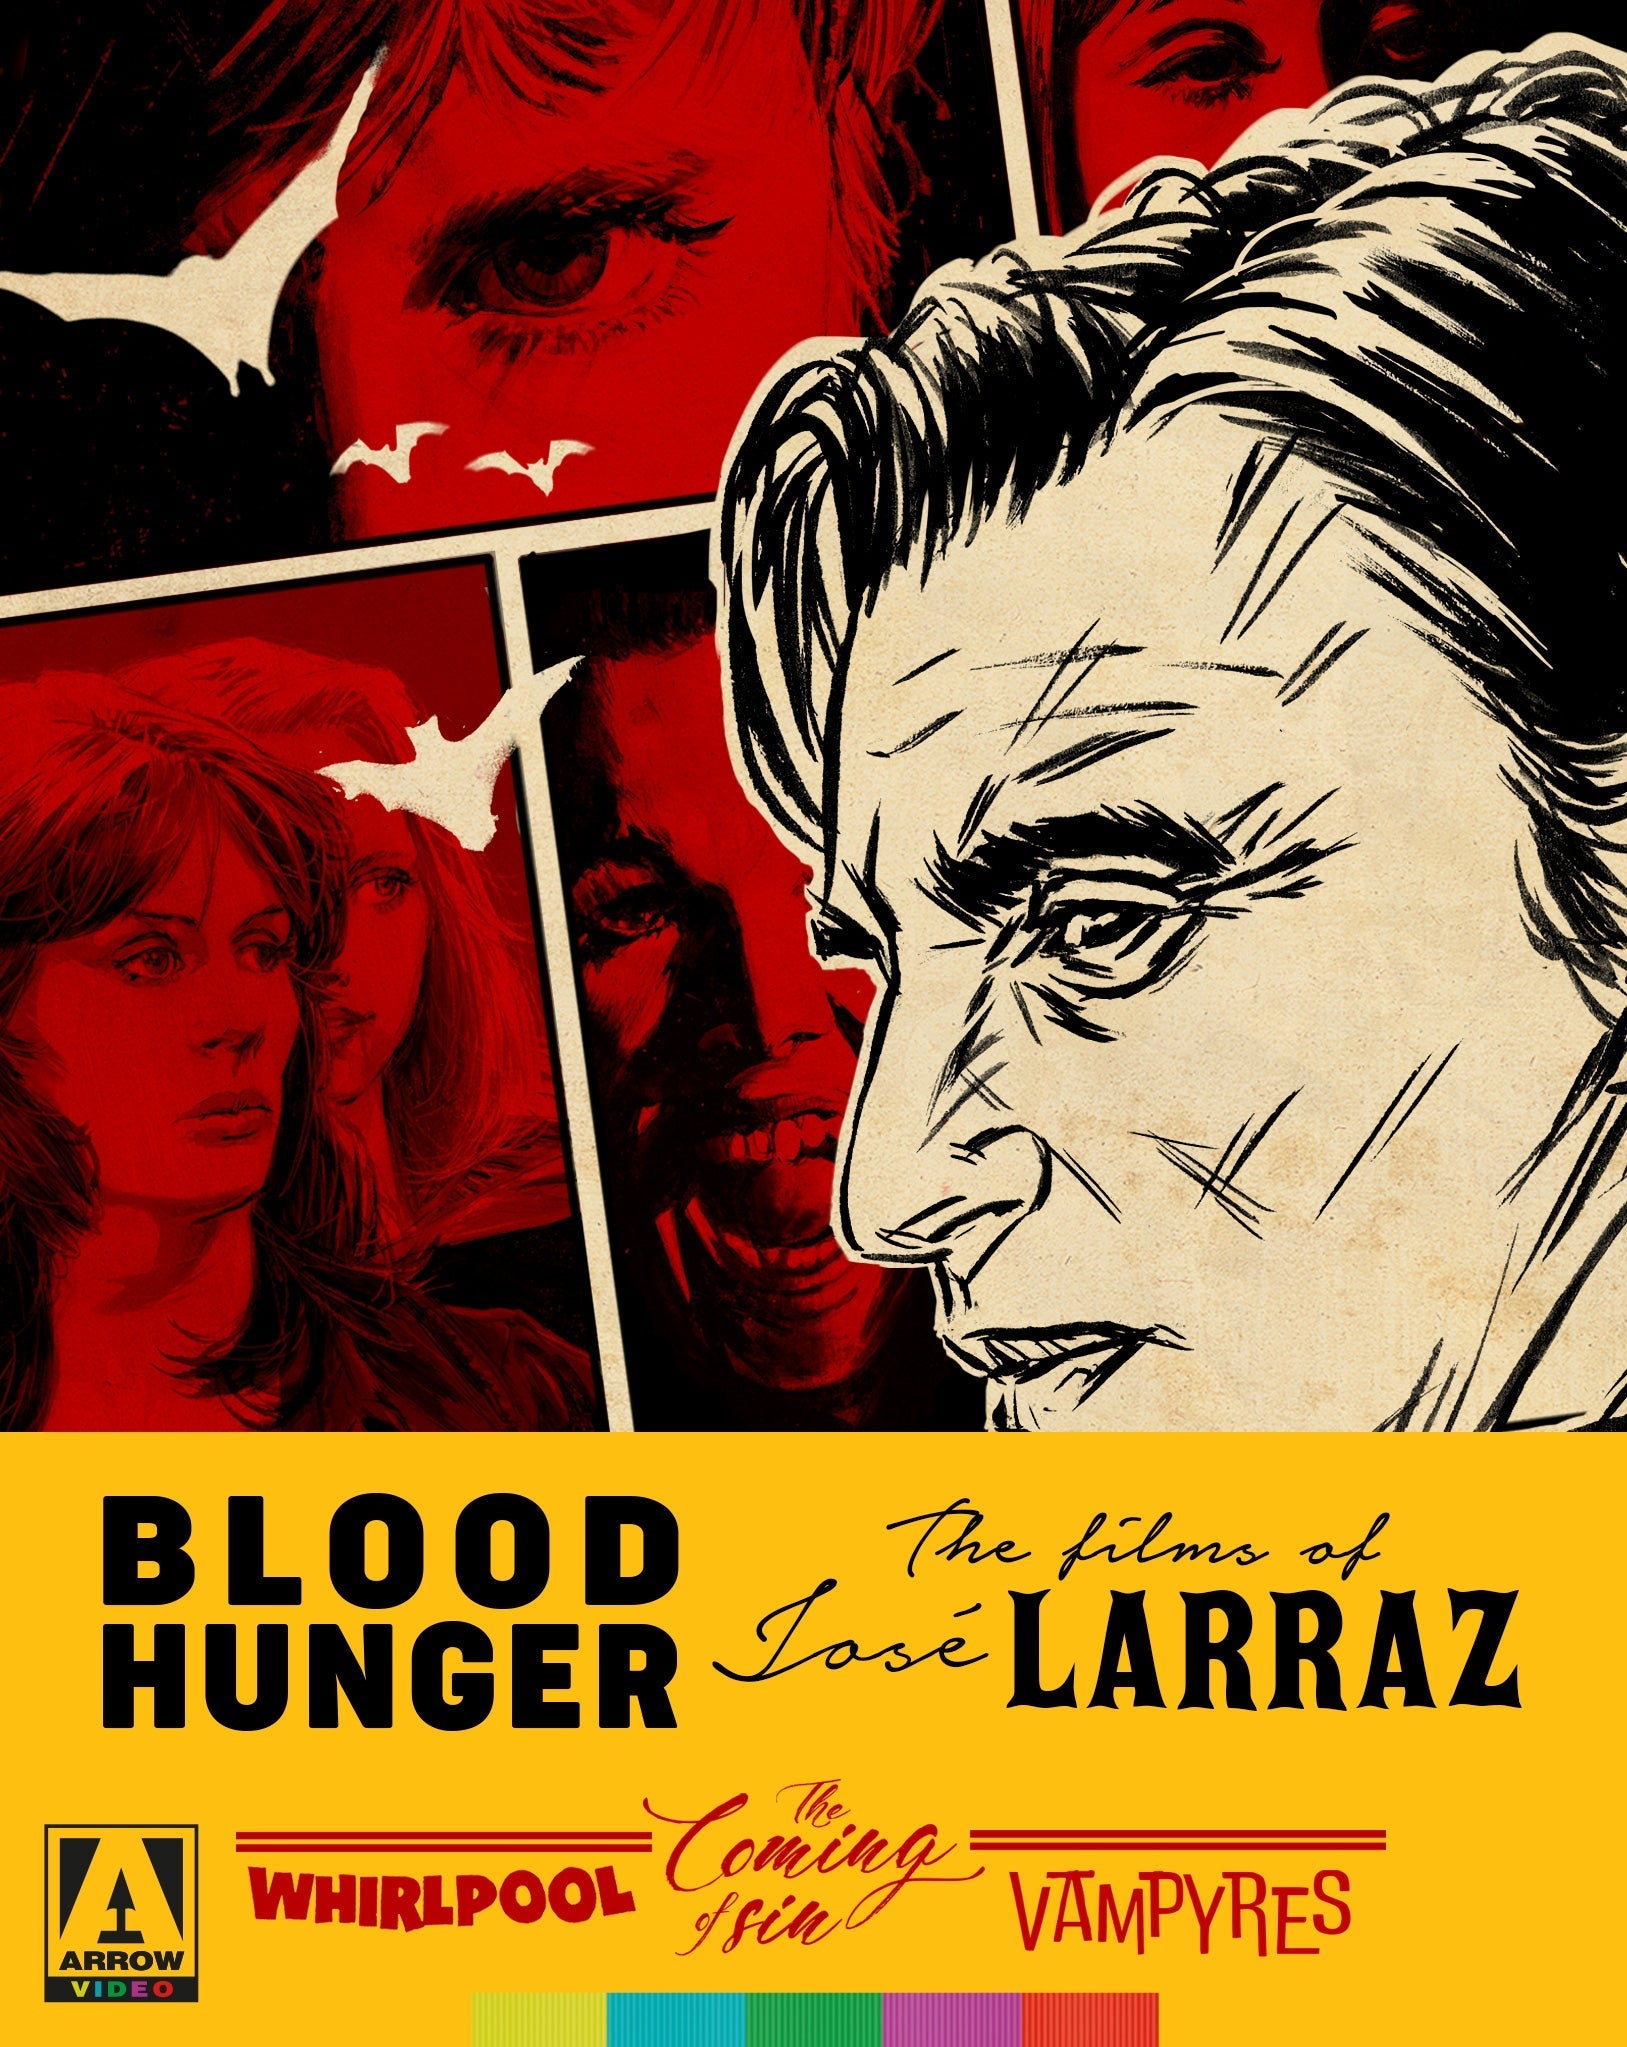 Blood Hunger: The Films Of Jose Larraz (Limited Edition) Blu-Ray Blu-Ray